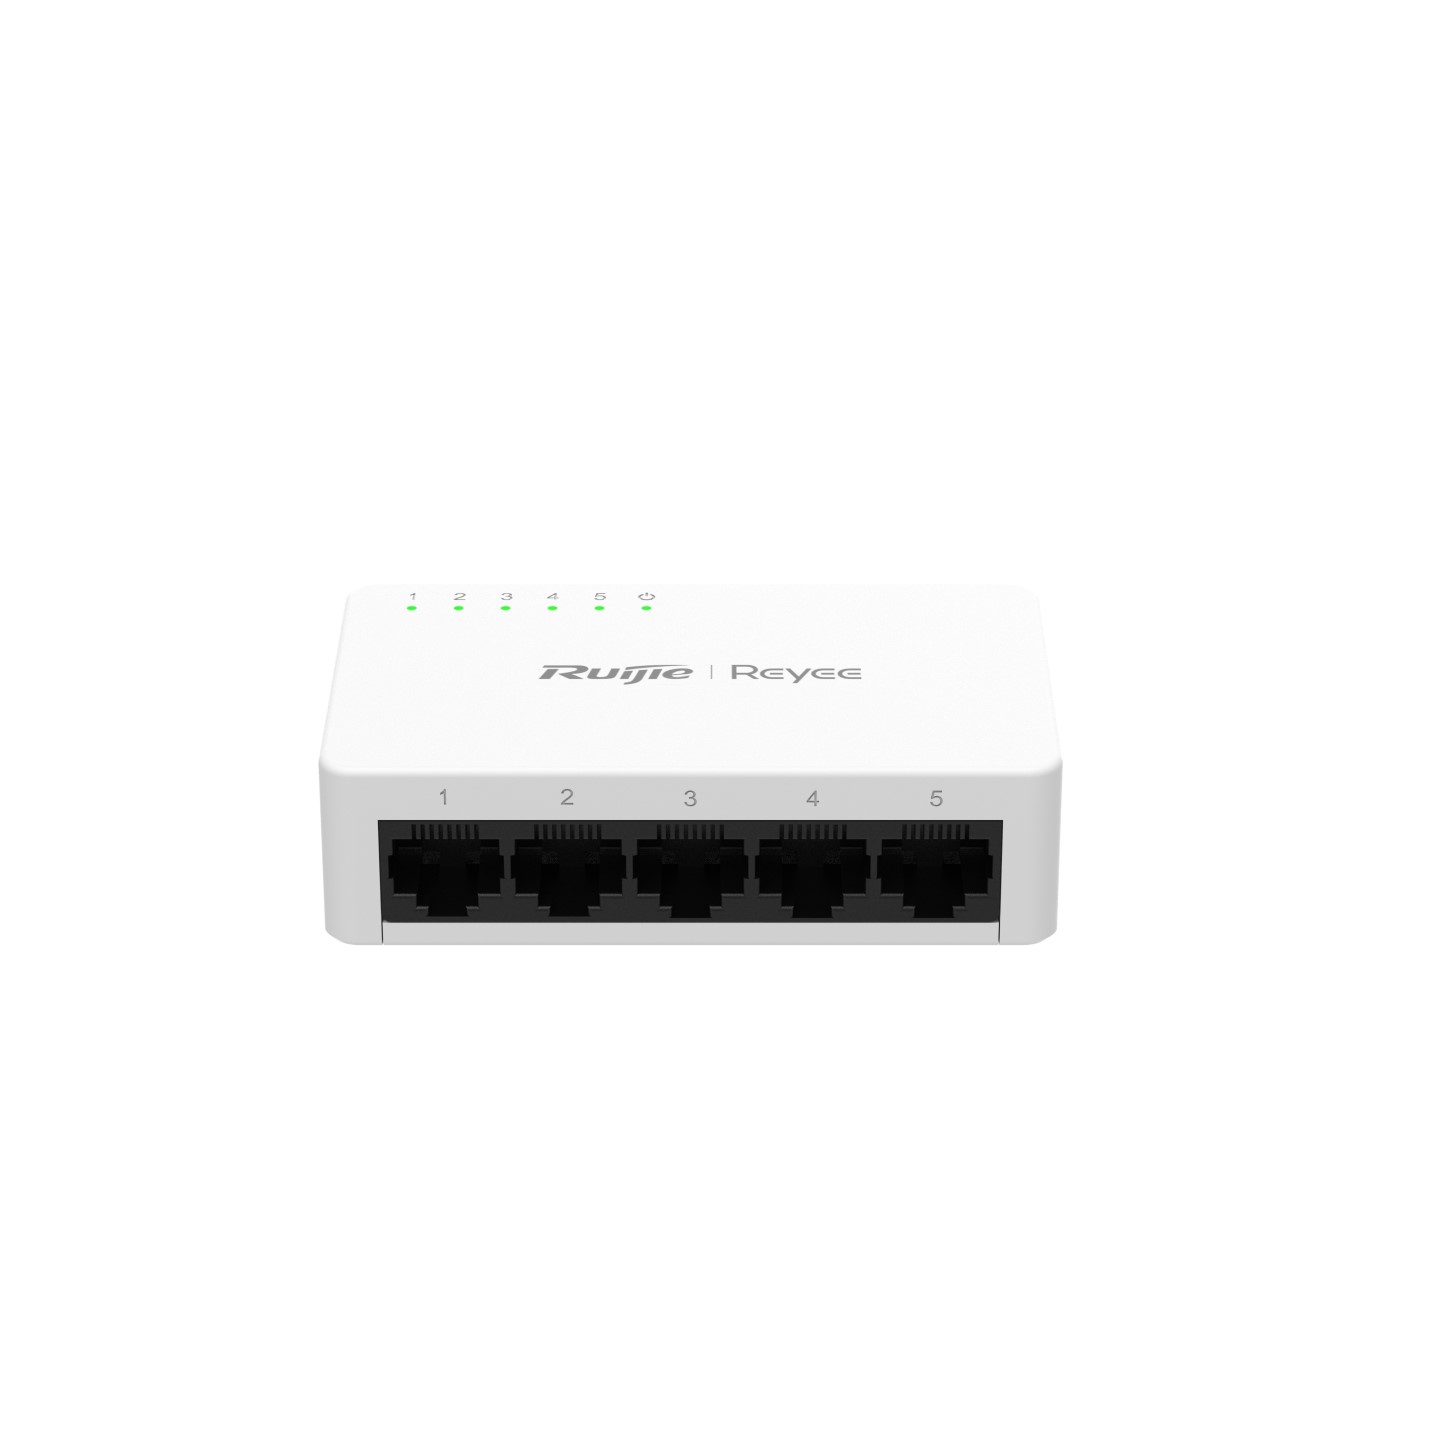 RG-ES05G-L, 5-Port 10/100/1000 Mbps Unmanaged Non-PoE Switch - Ruijie Reyee